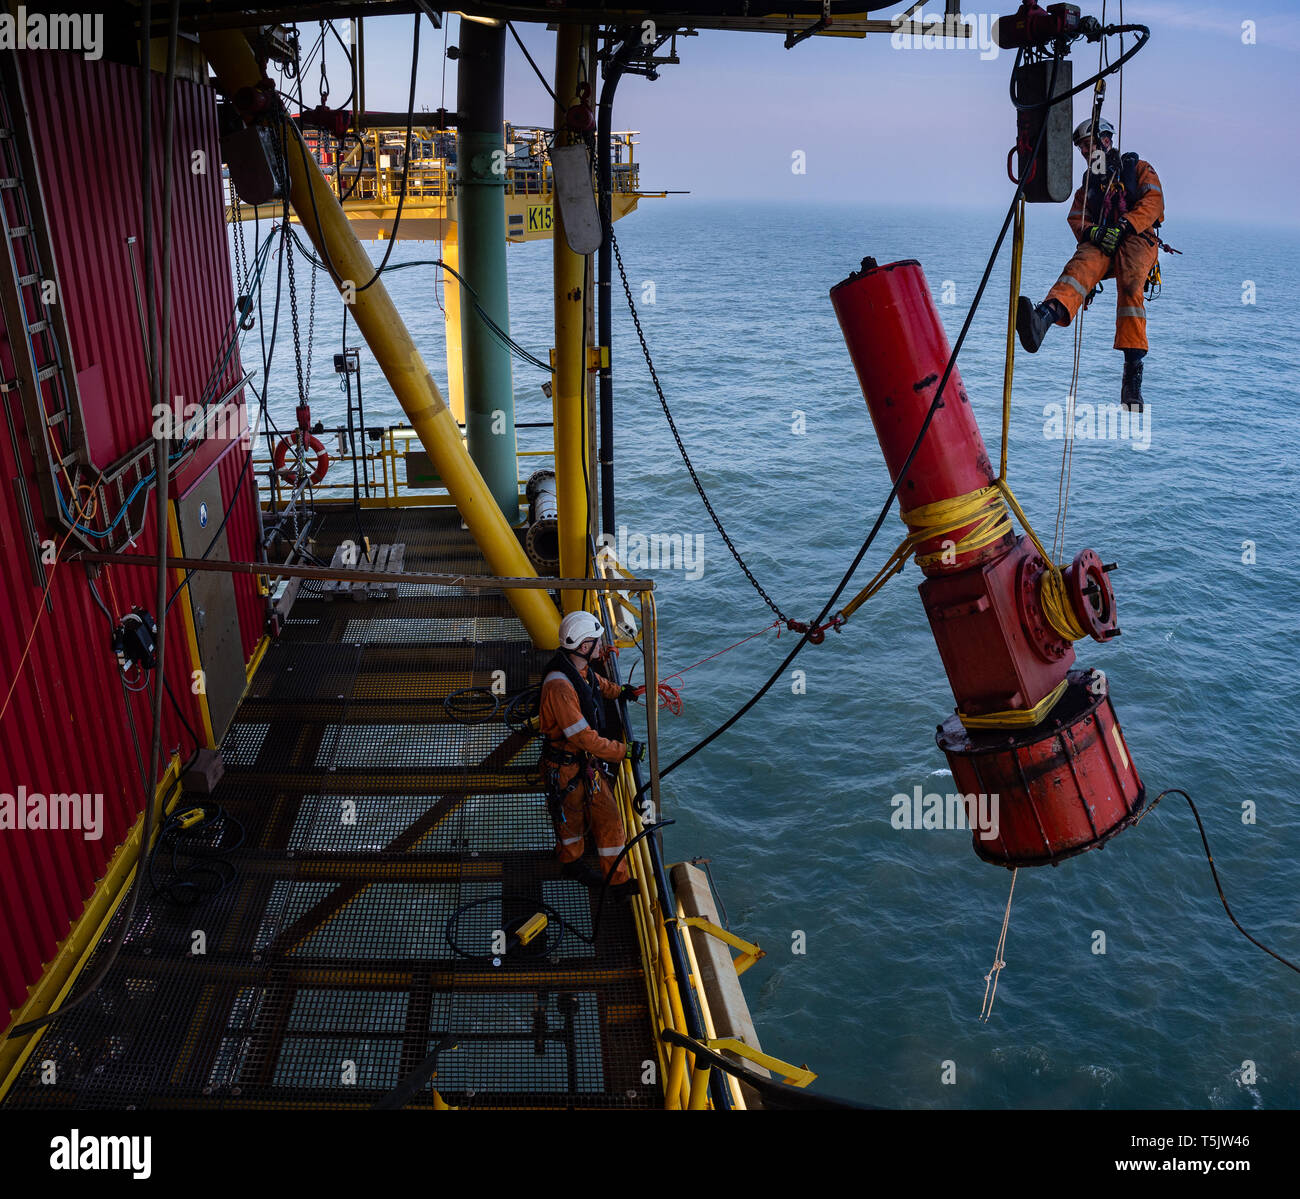 Abseilers rigging equipment on offshore platform Stock Photo